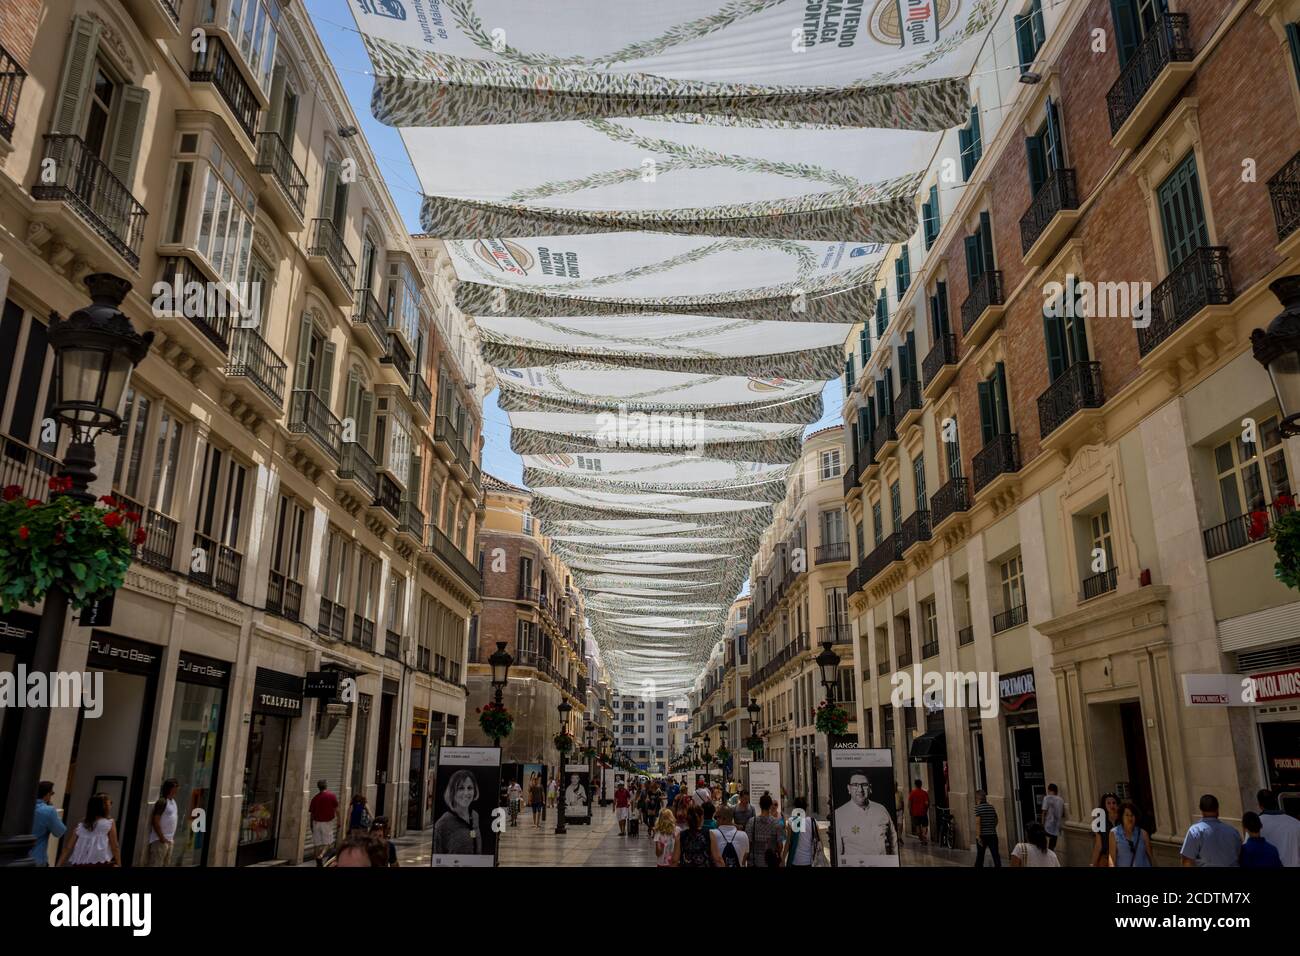 Malaga, Spain - June 24: Cloth is hung over the shopping street in the city of Malaga, Spain, Europe Stock Photo